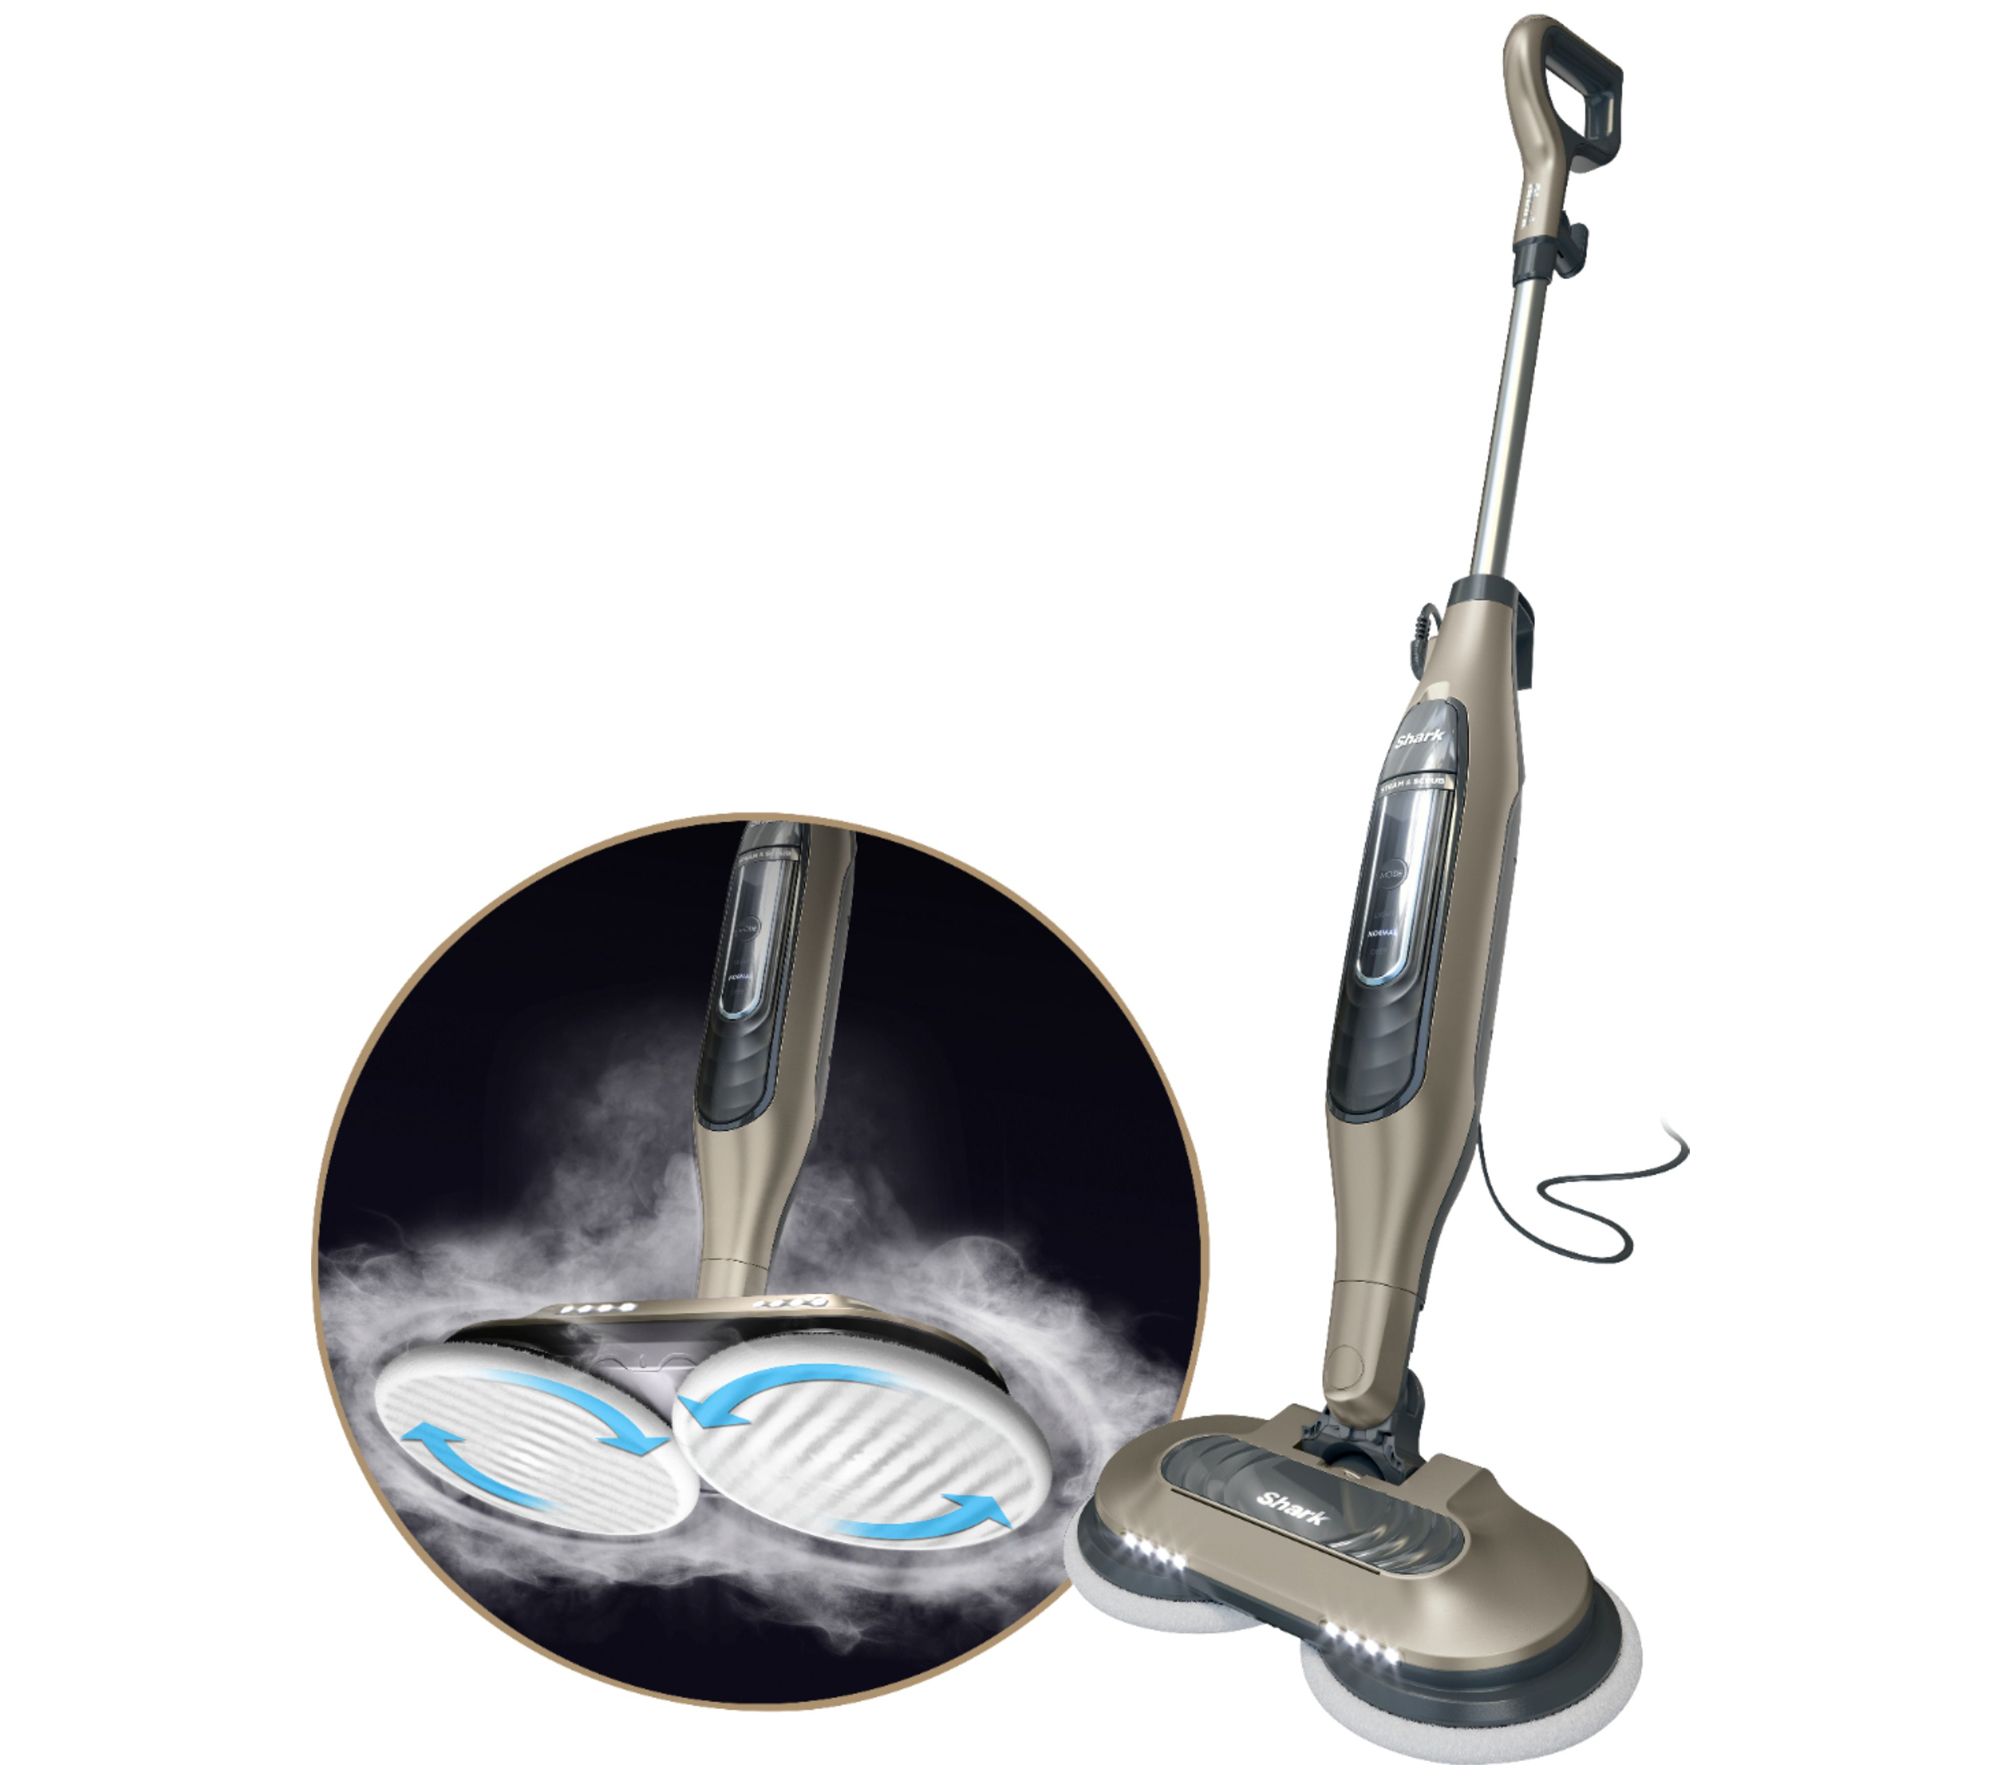 Jewelry Steam Cleaner - yes we use this one in our shop every day